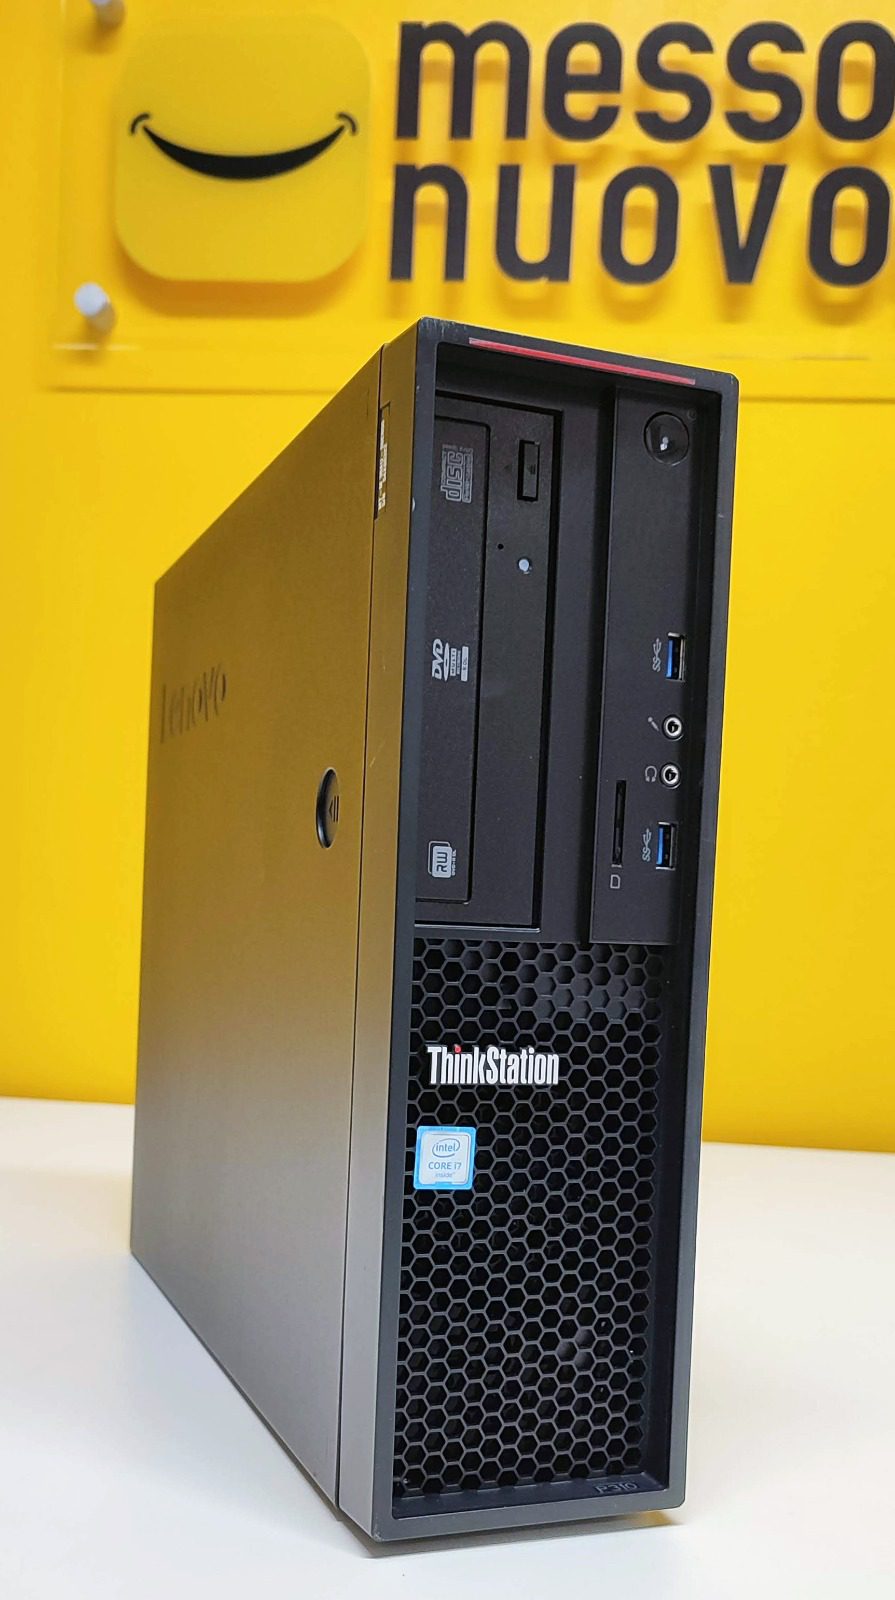 Lenovo ThinkStation P310 SFF Workstation | Intel Core i7-6700 | Ram 32Gb | SSD 512Gb | Windows 10 Pro DVD The compact and reliable workstation